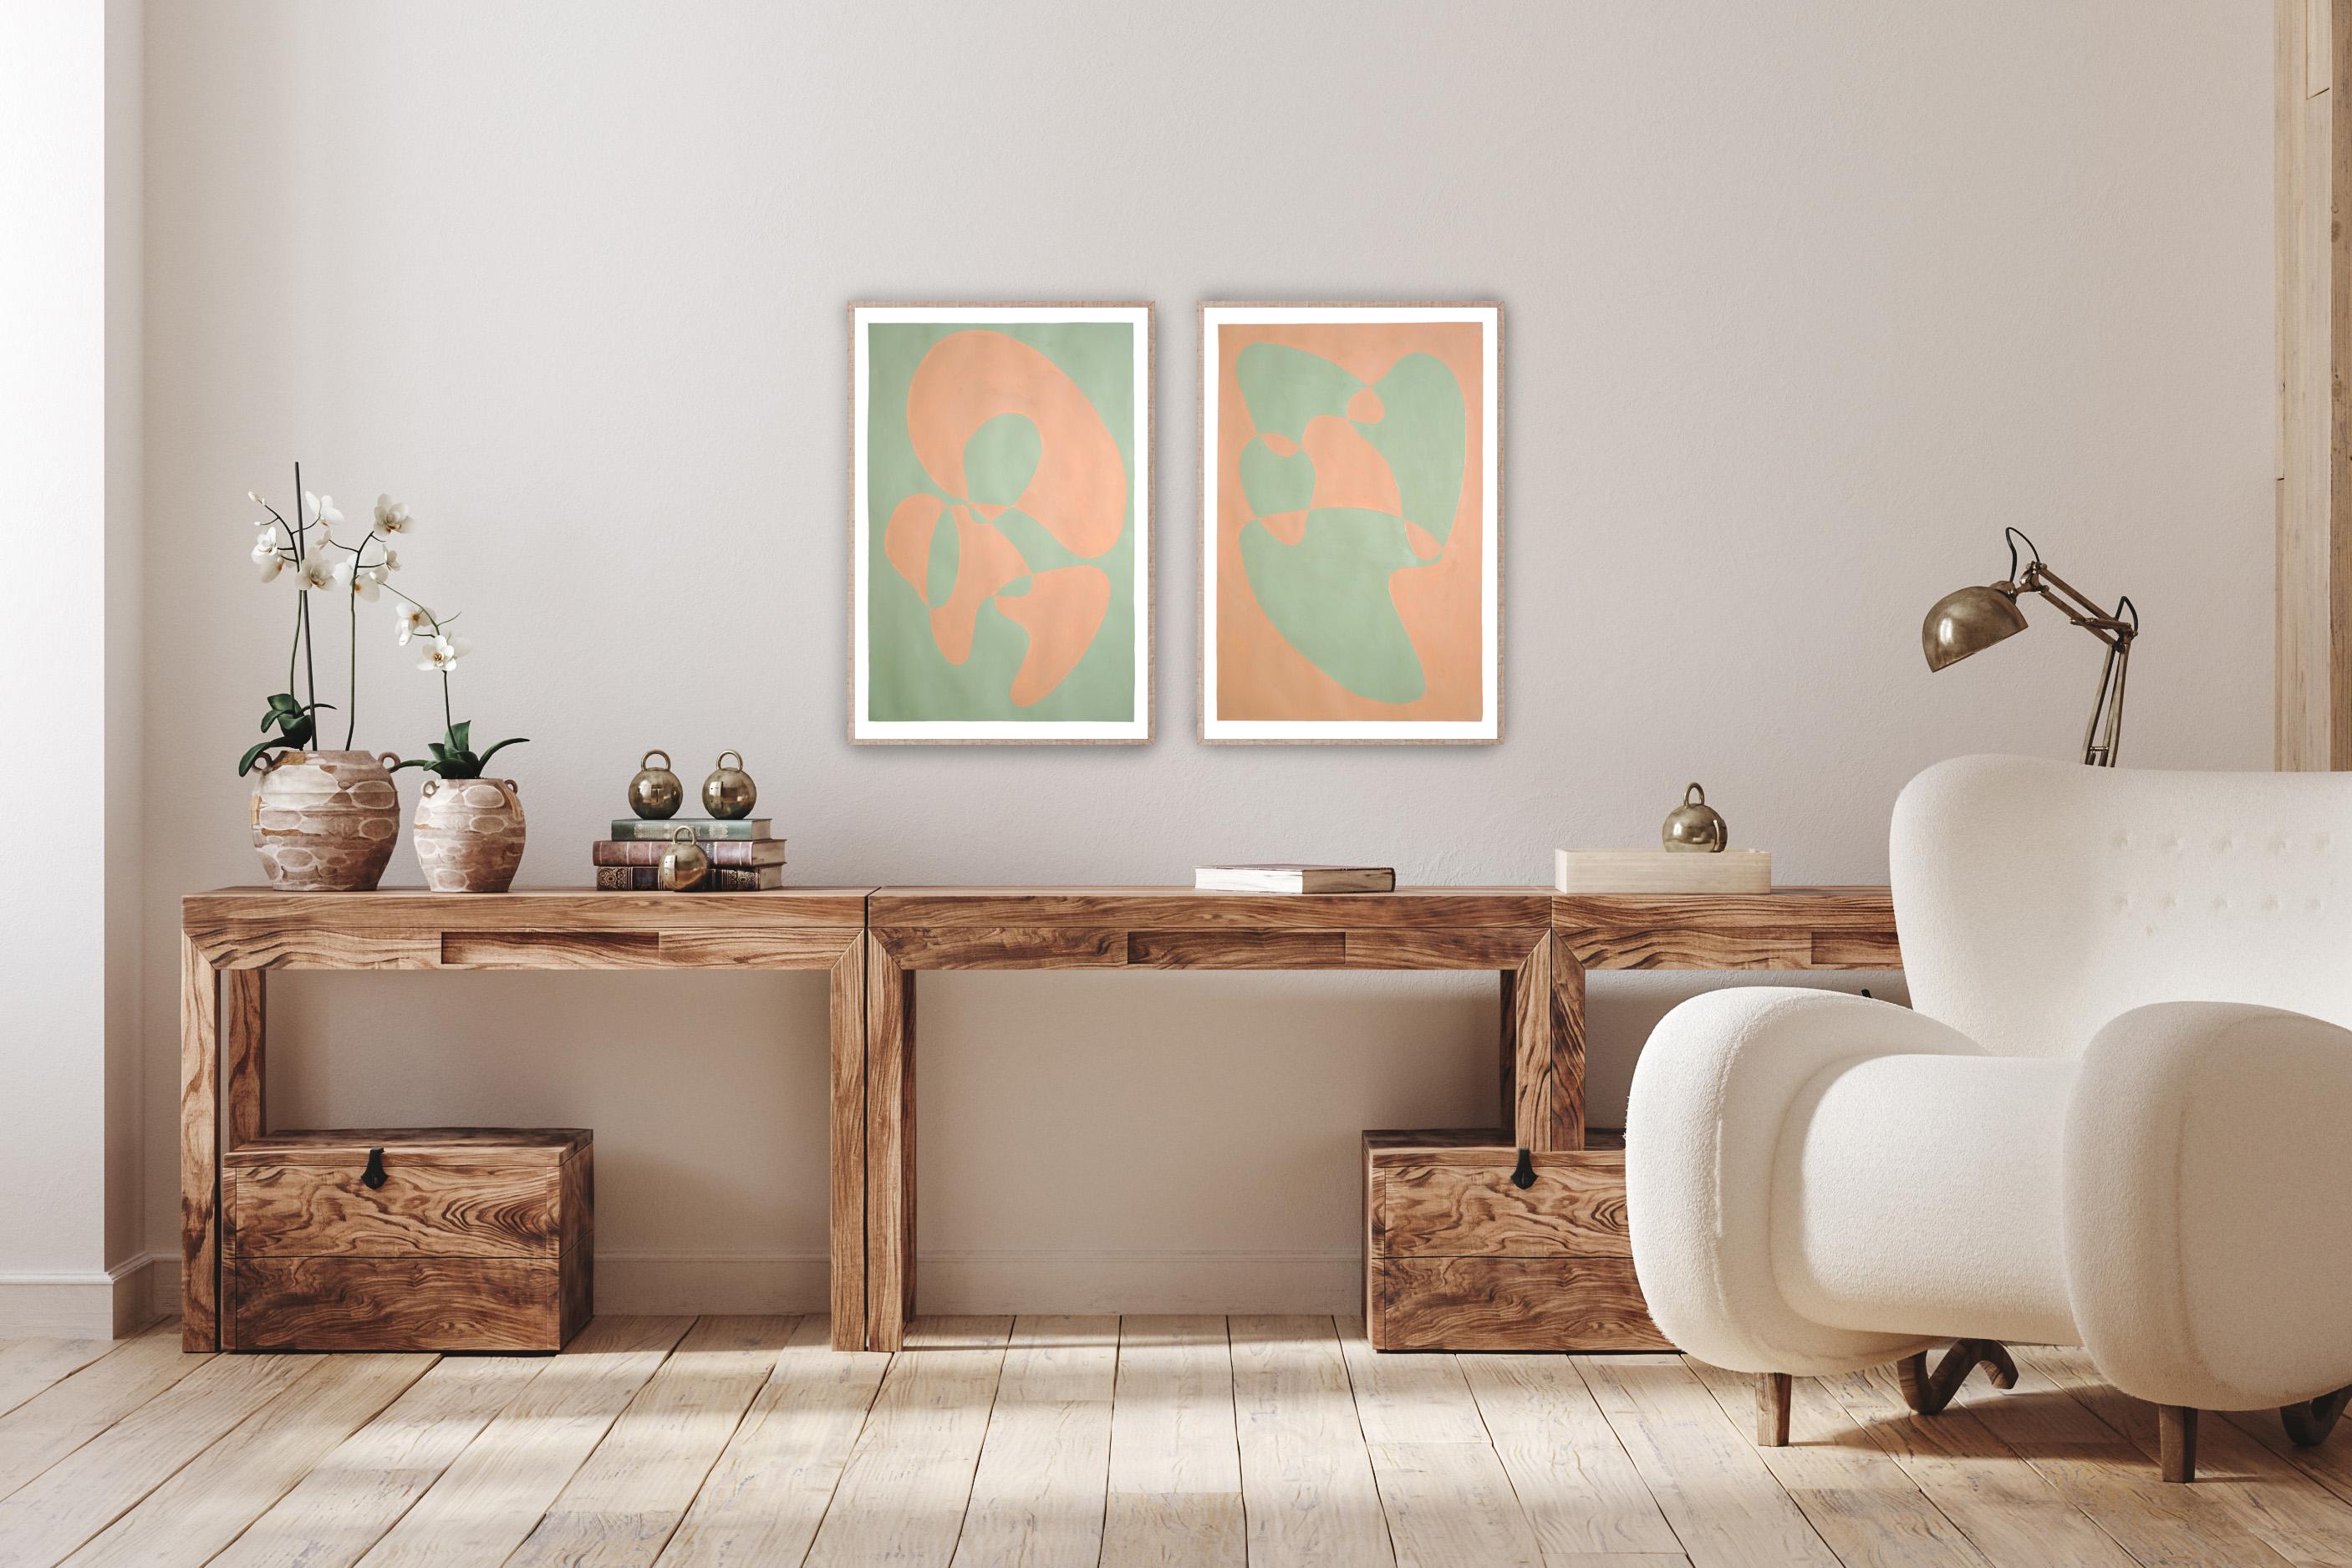 Bodies Moving Slowly, Abstract Figures Duo, Green and Tan, Pastel Tones Diptych 1